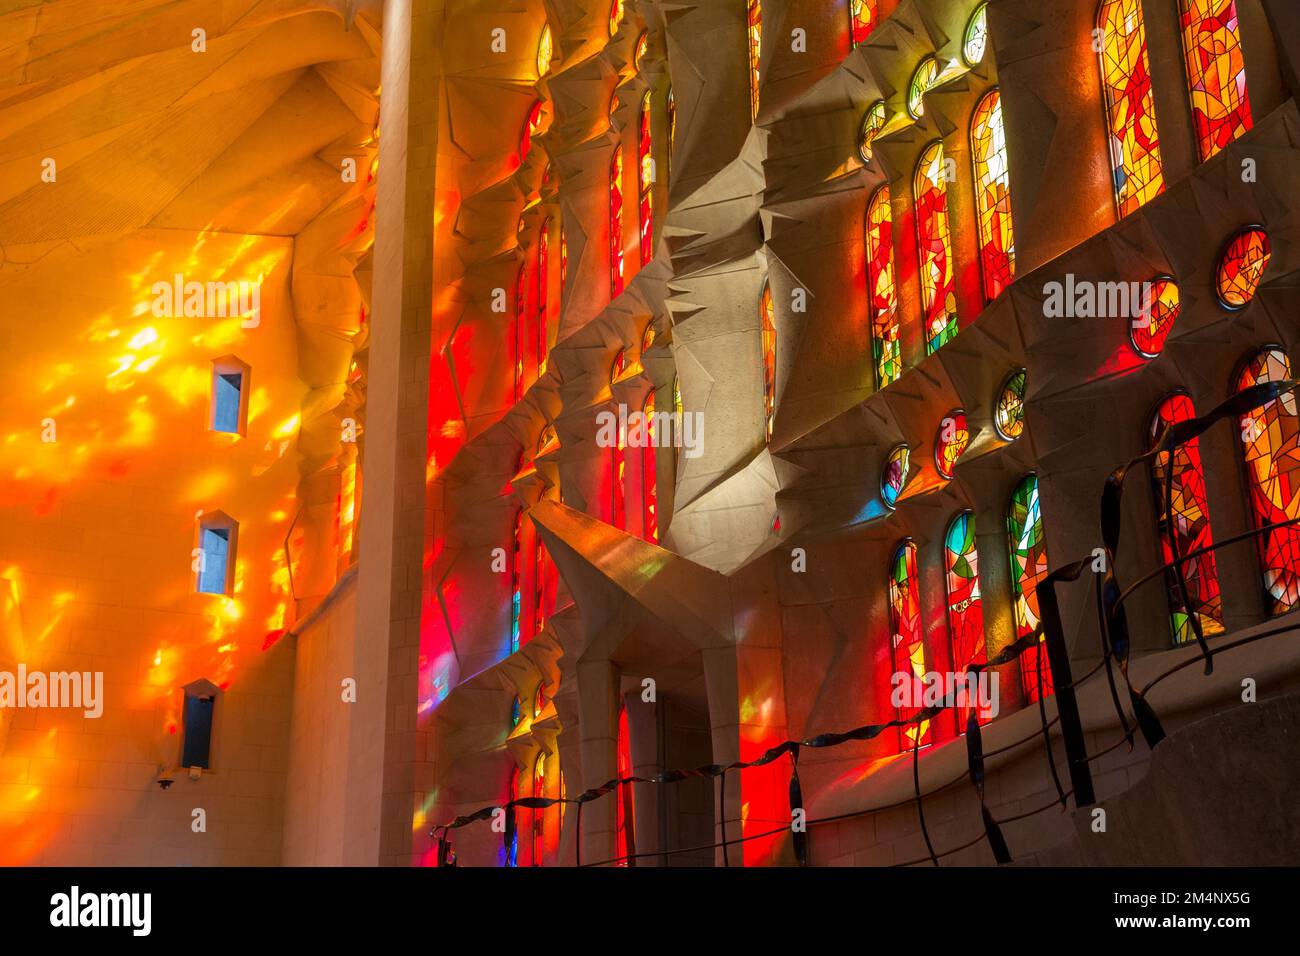 Sagrada Familia Cathedral interior with colourful stained glass, Barcelona, Catalonia, Spain Stock Photo